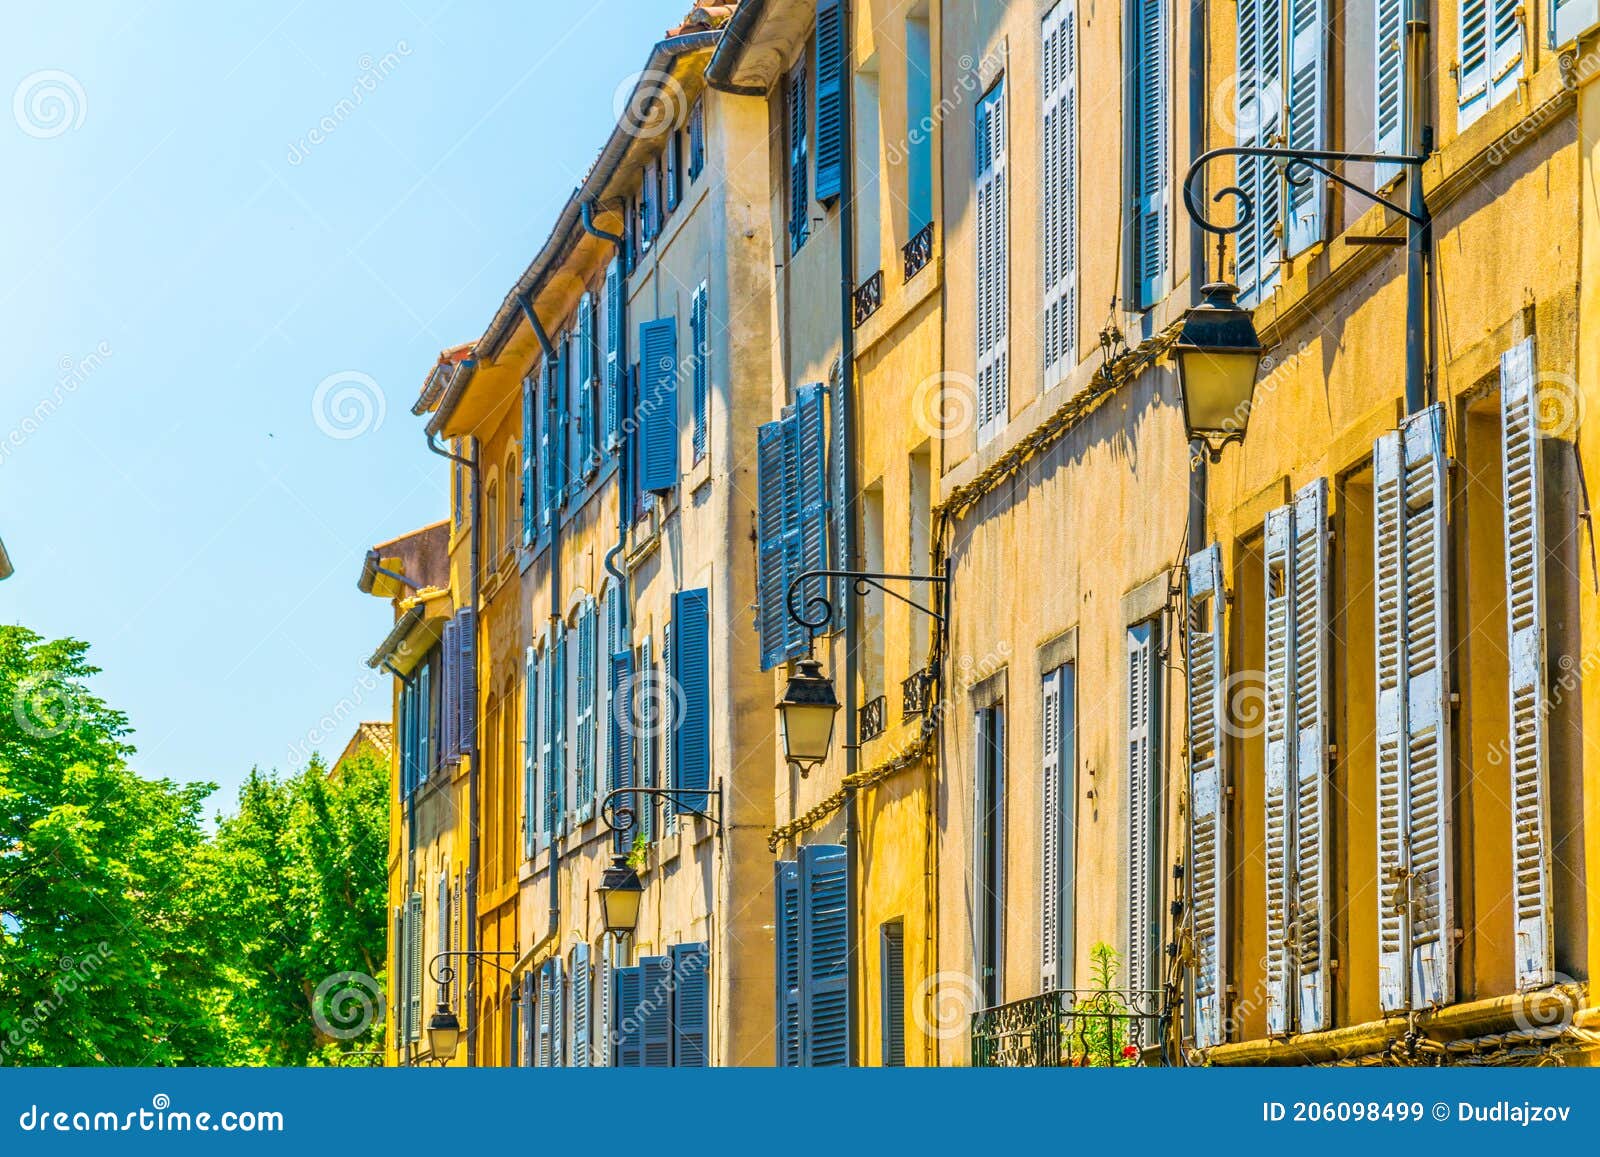 facades of houses in the old center of aix-en-provence, france